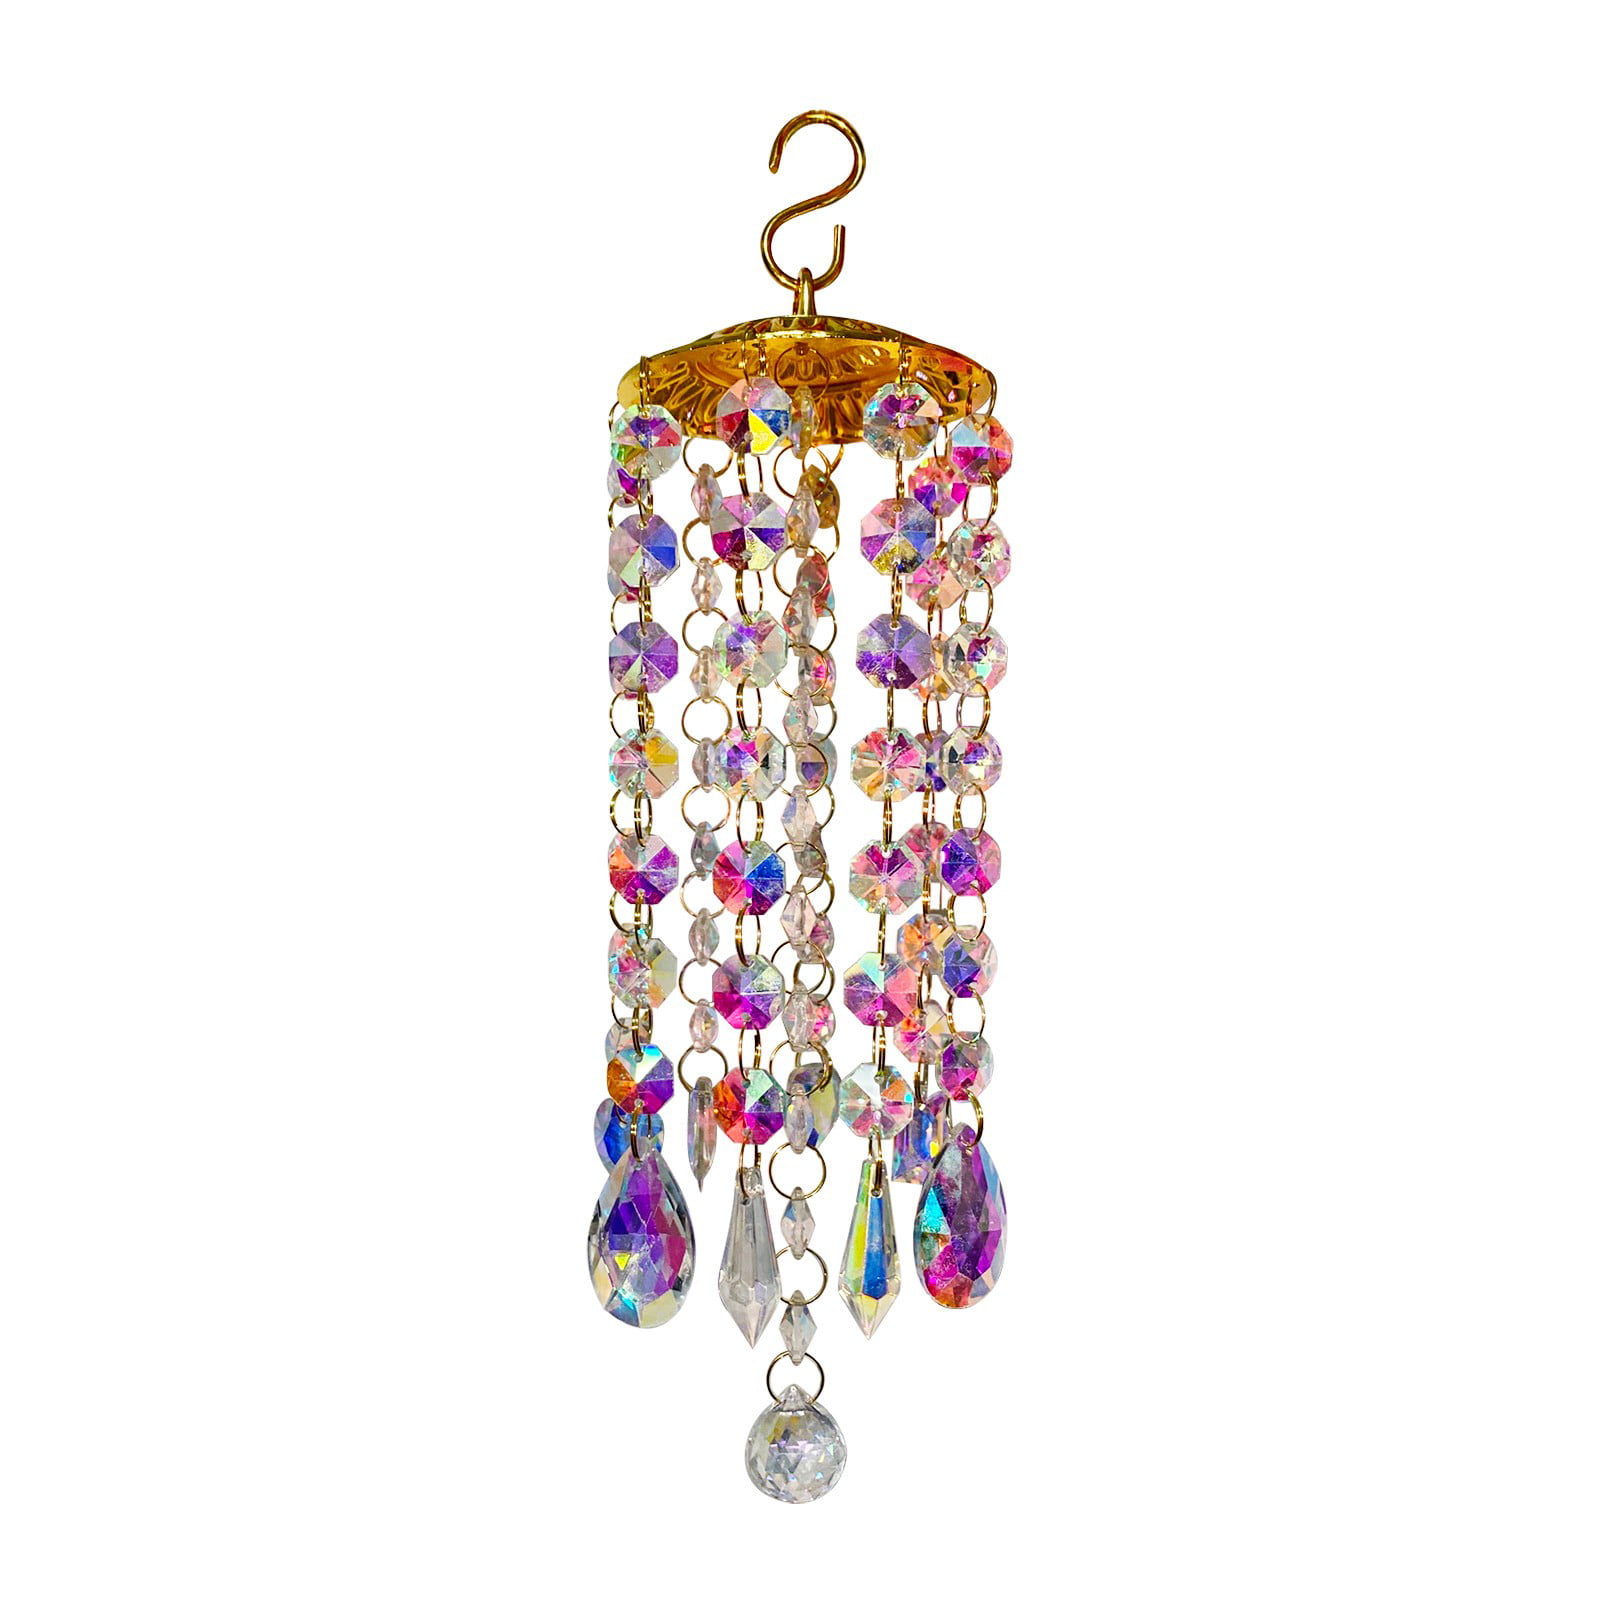 Crystal Prisms Wind Chimes Hanging Chandelier Chimes Home Hanging Decoration NA7 